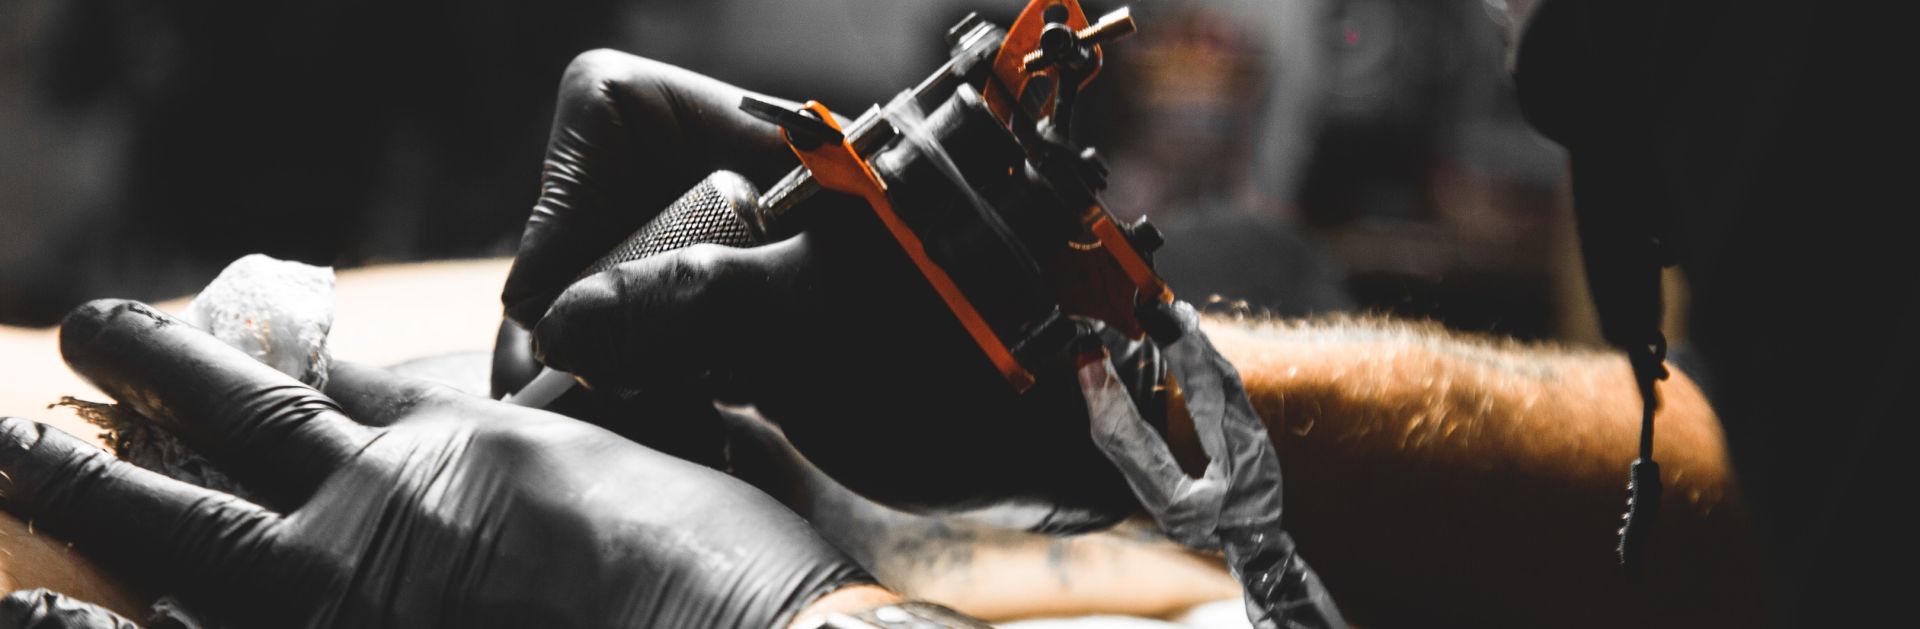 Close up image of a tattoo being inscribed on an a person.